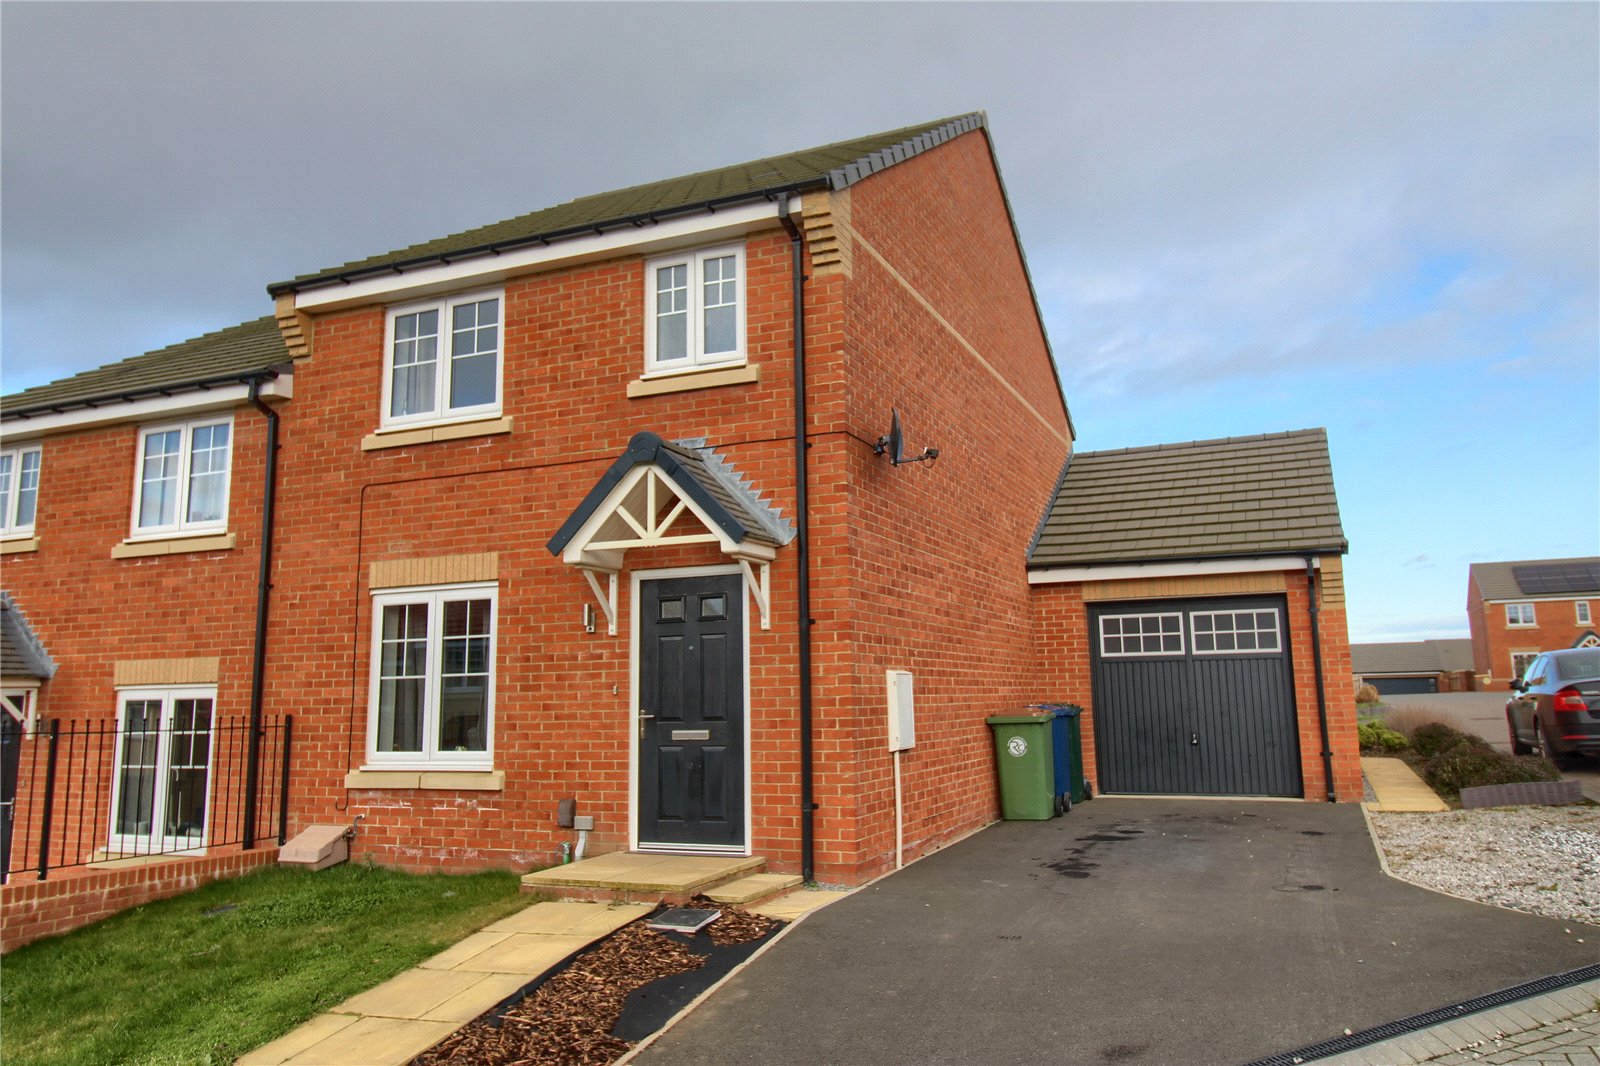 3 bed house for sale in Brambling Drive, Guisborough 1